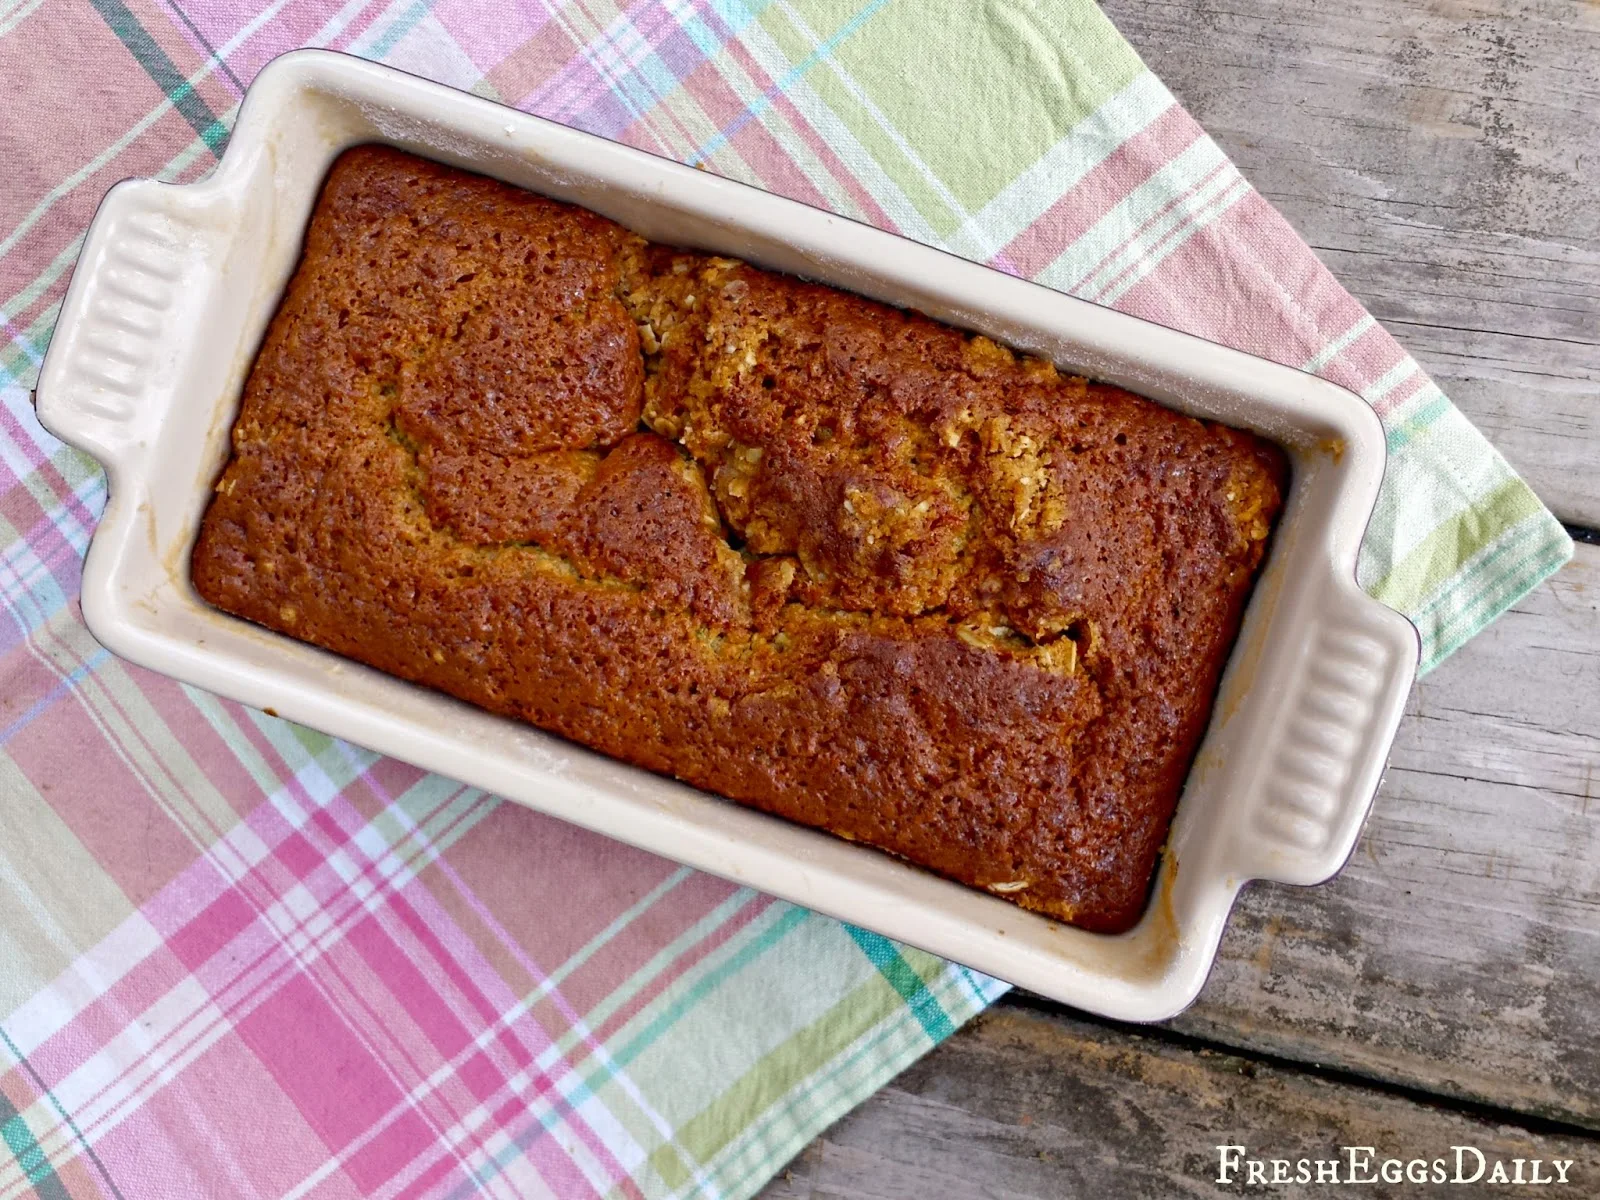 Cardamom Ginger Zucchini Bread with Streusel Topping